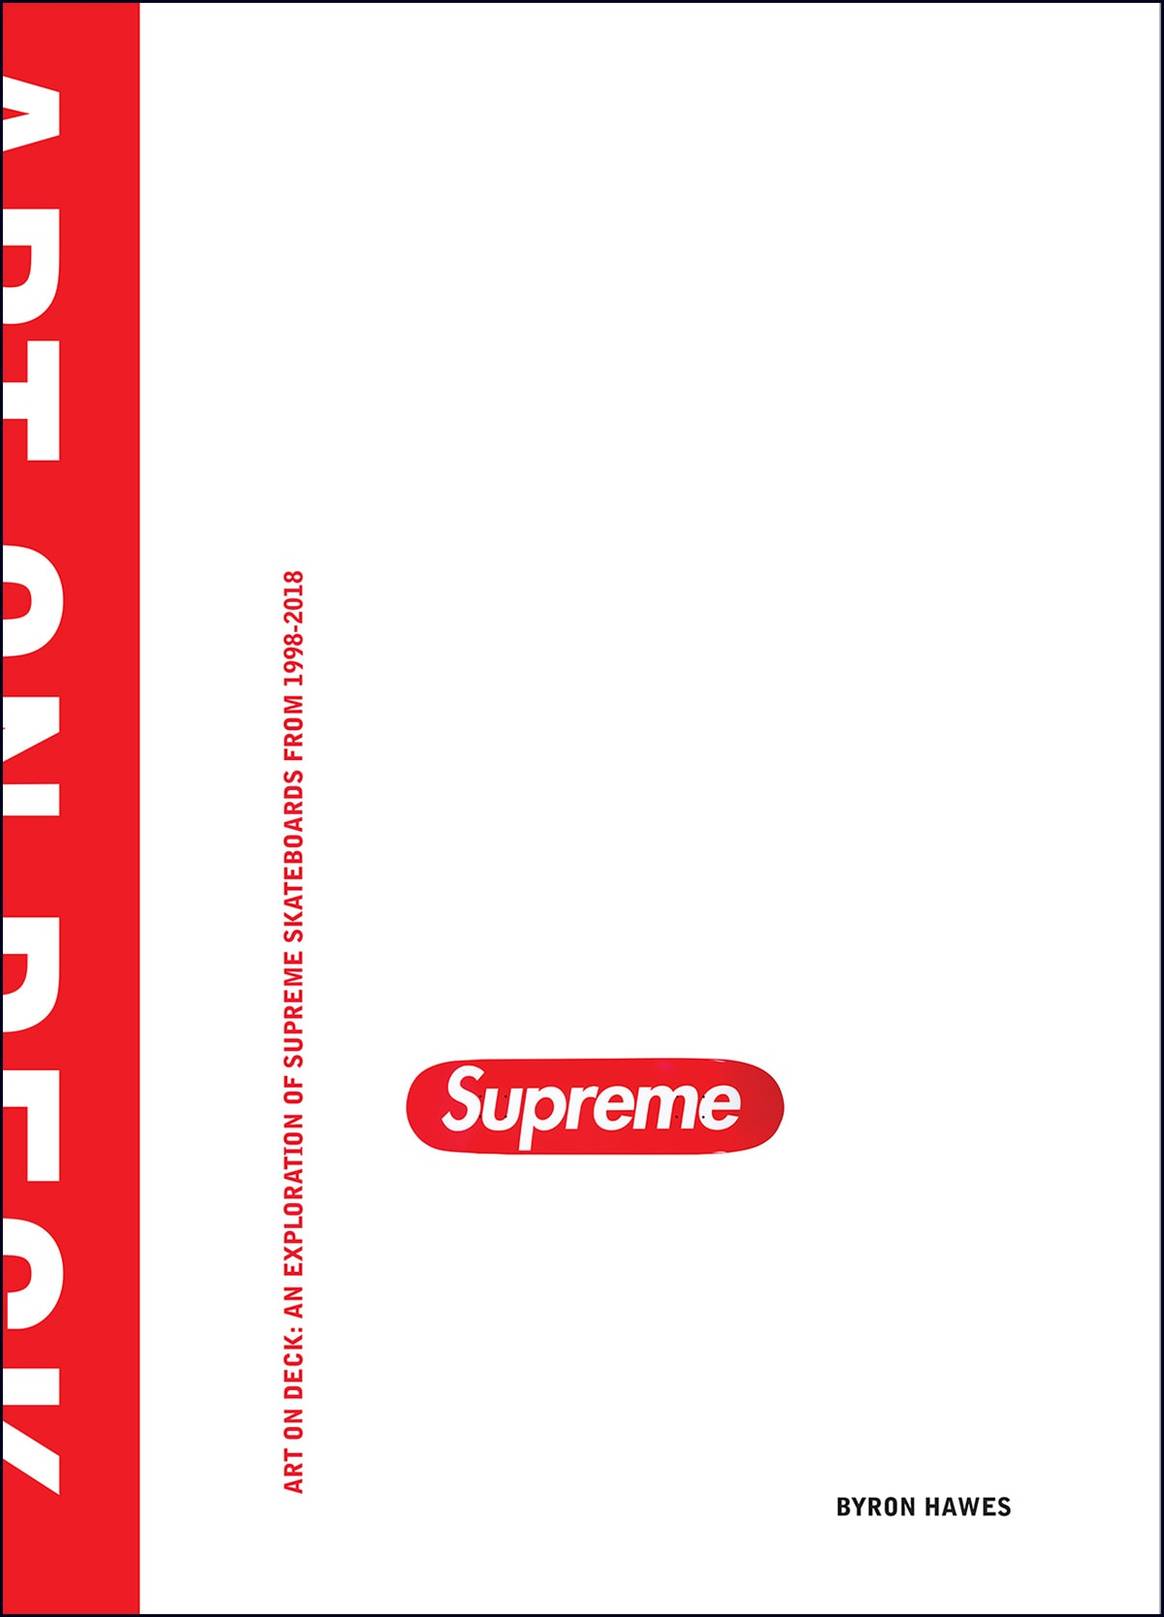 HED: Fashion and art critic explores Supreme's history of design and skate culture in new art book